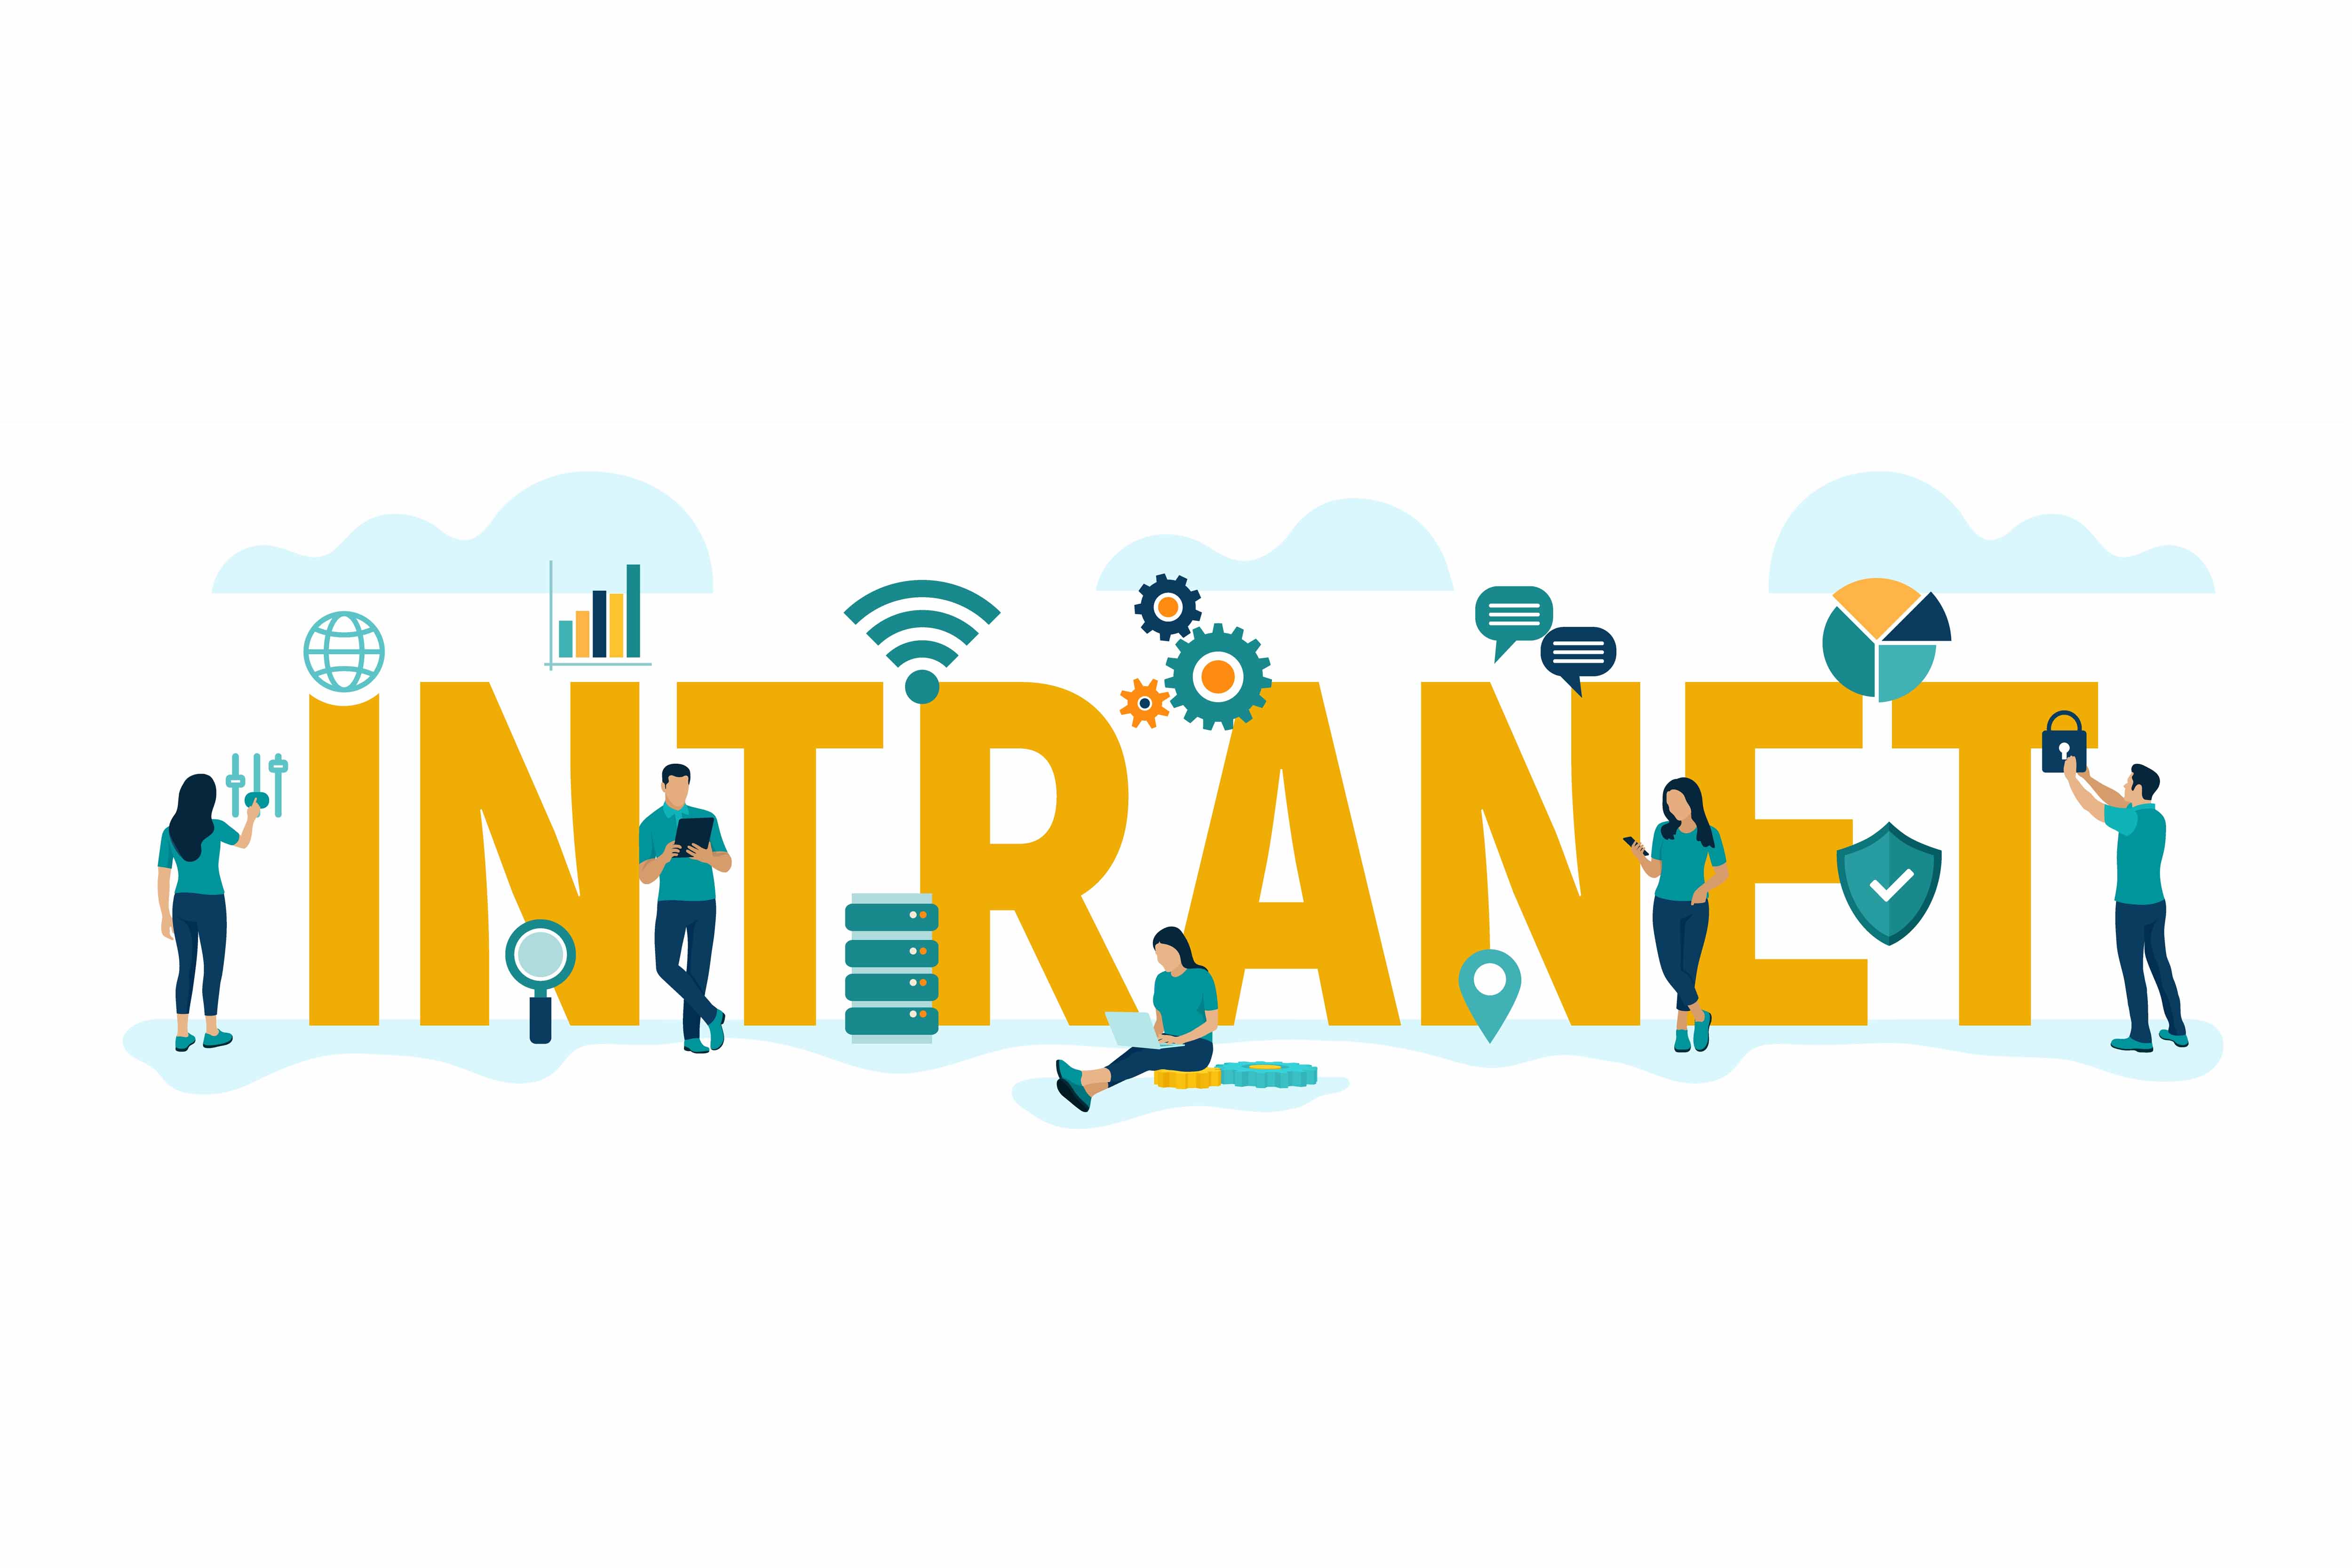 Is your Intranet Digital Workplace secure?